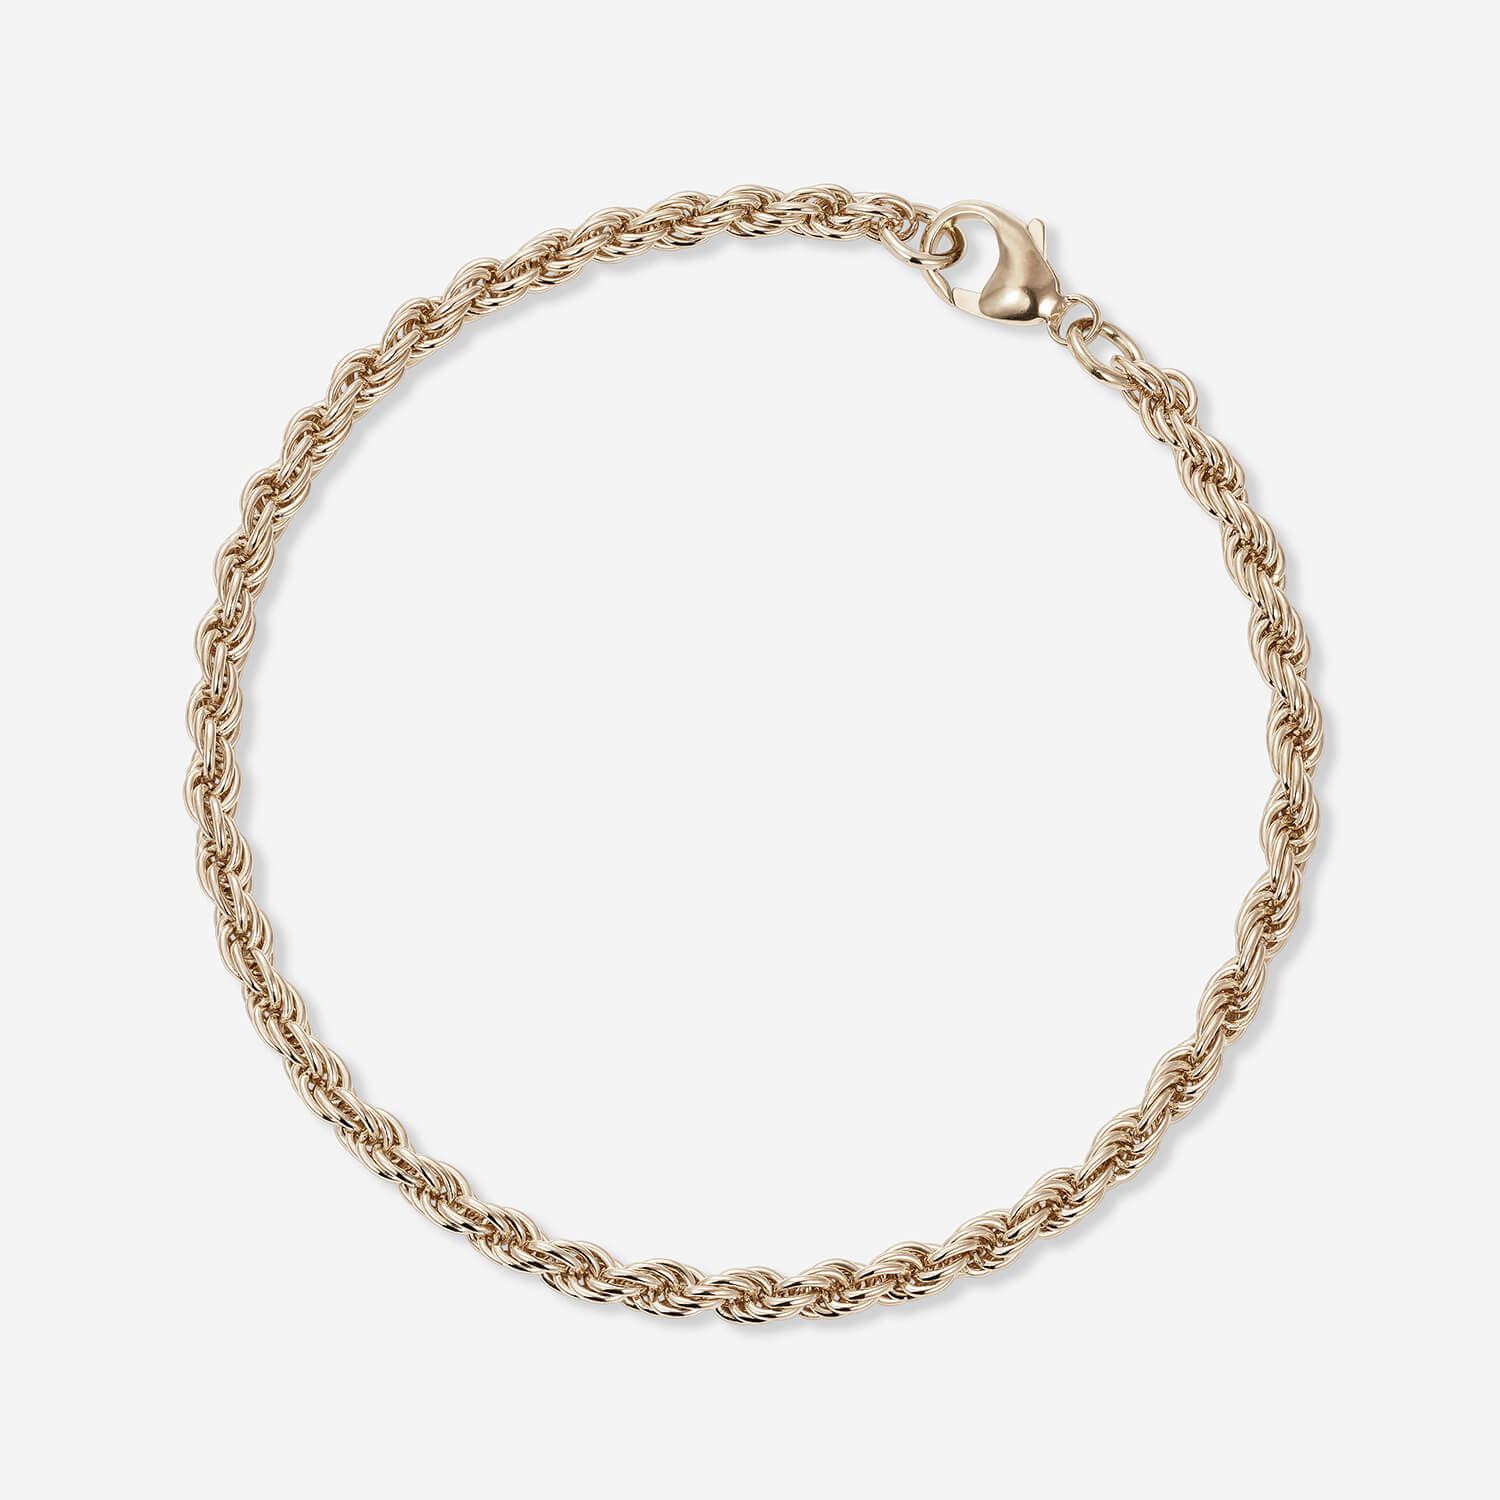 886 Royal Mint Bracelets 886 Rope Chain Bracelet in 9ct Yellow Gold